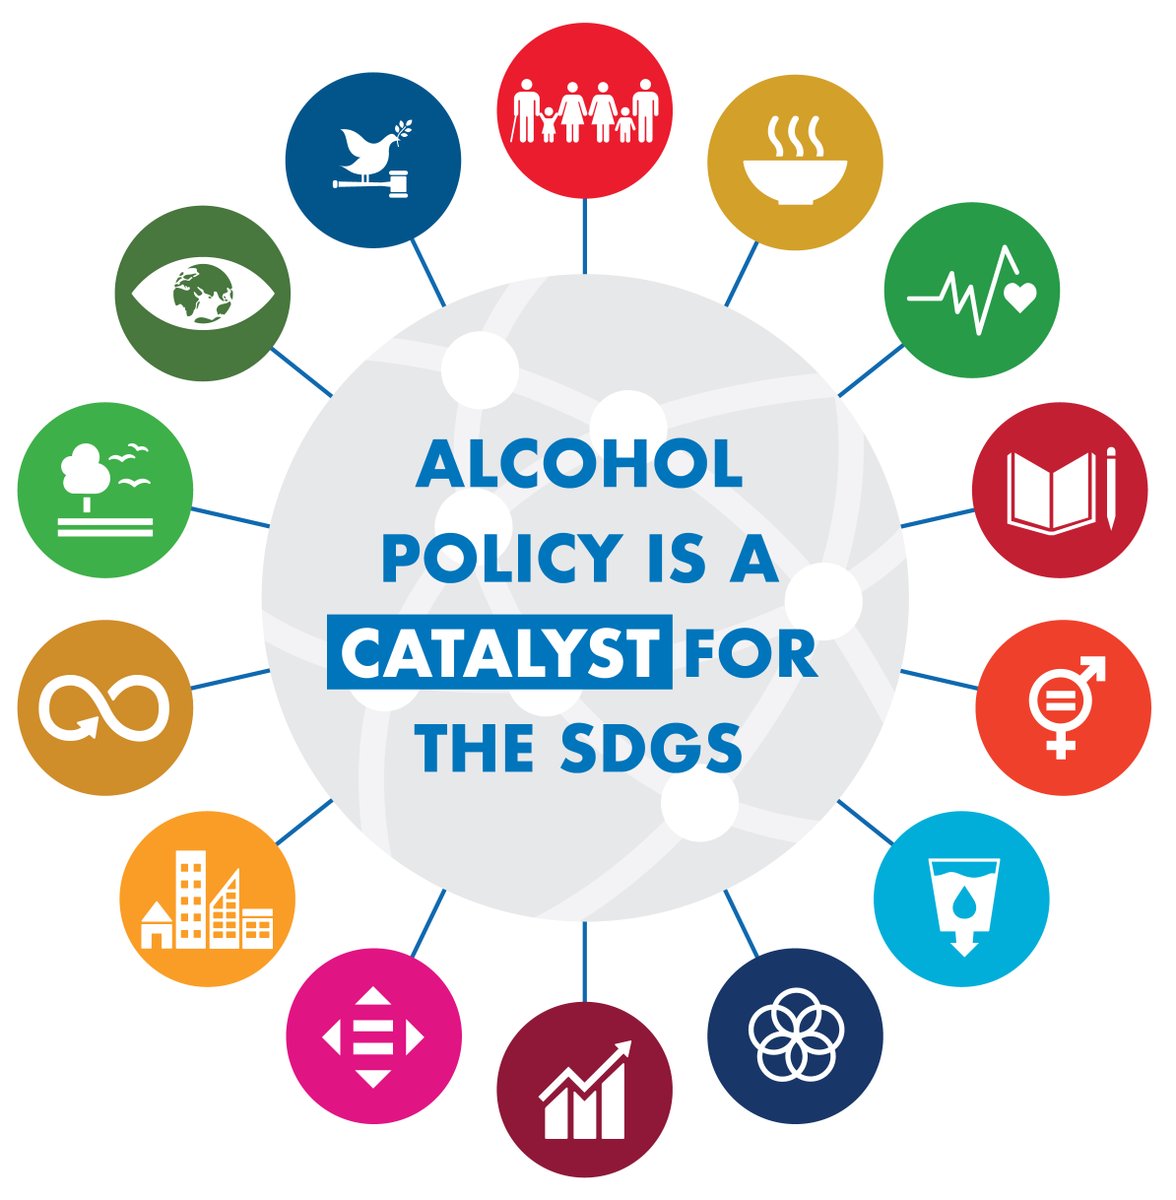 The 2022-2030 action plan could address gaps in implementation of  @WHO Global Alcohol Strategy by helping more countries introduce evidence-based alcohol control measuresRead more https://movendi.ngo/blog/2020/07/27/where-next-for-the-global-governance-of-alcohol-and-public-health/ #AlcPolPrio #AlcoholControl #DevelopmentForAll  #SDGs @McCabe_Centre